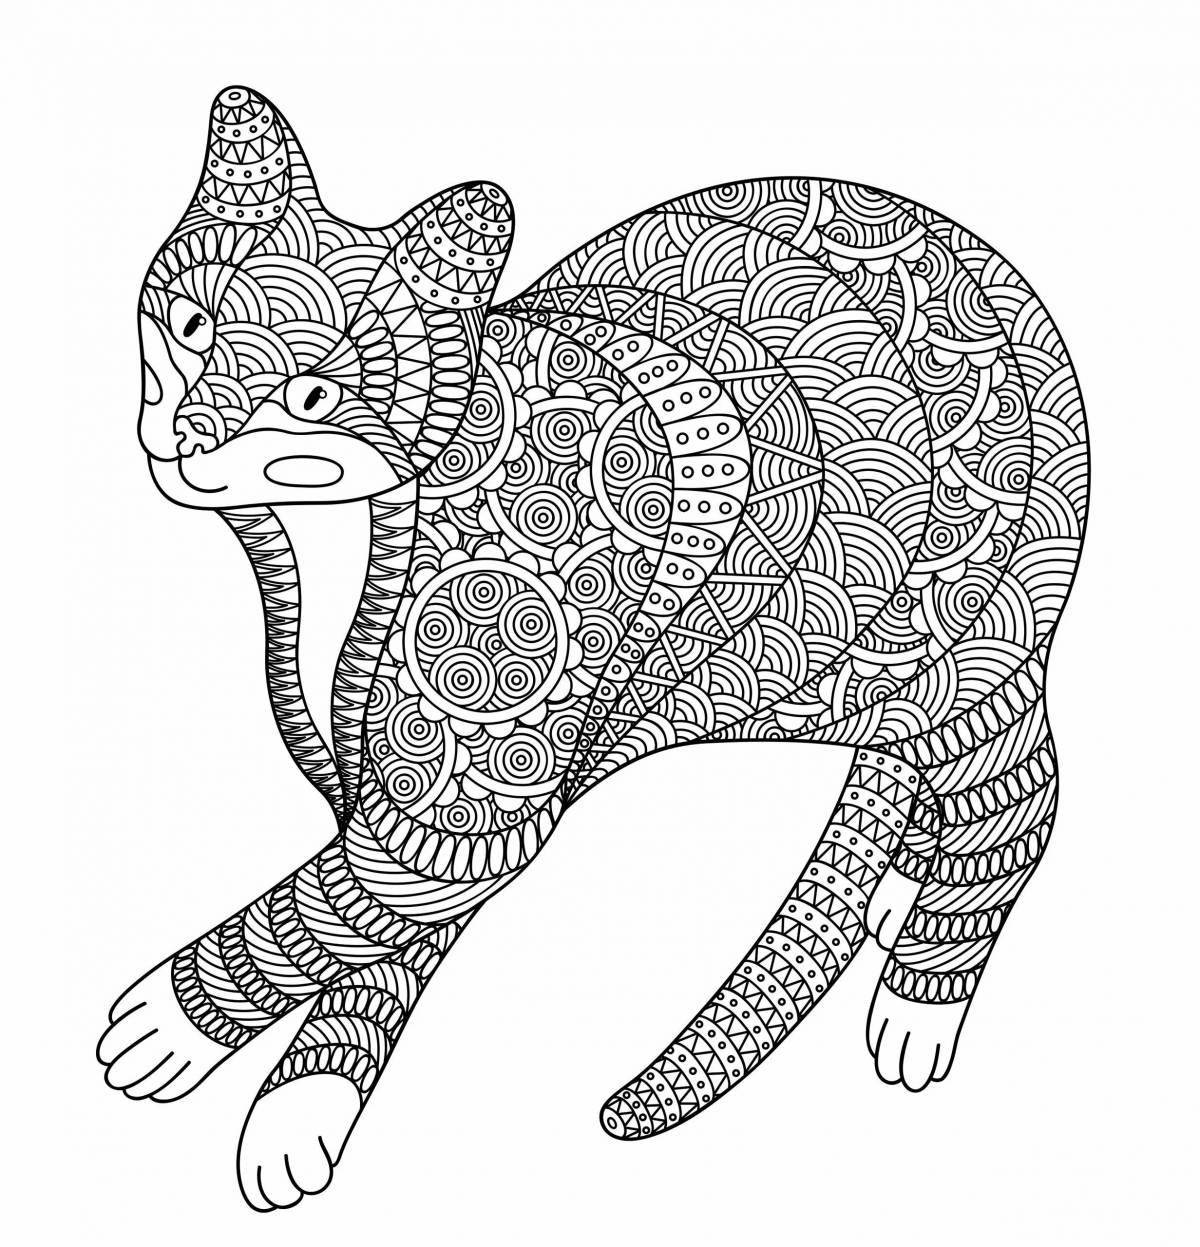 Adorable coloring book with detailed design